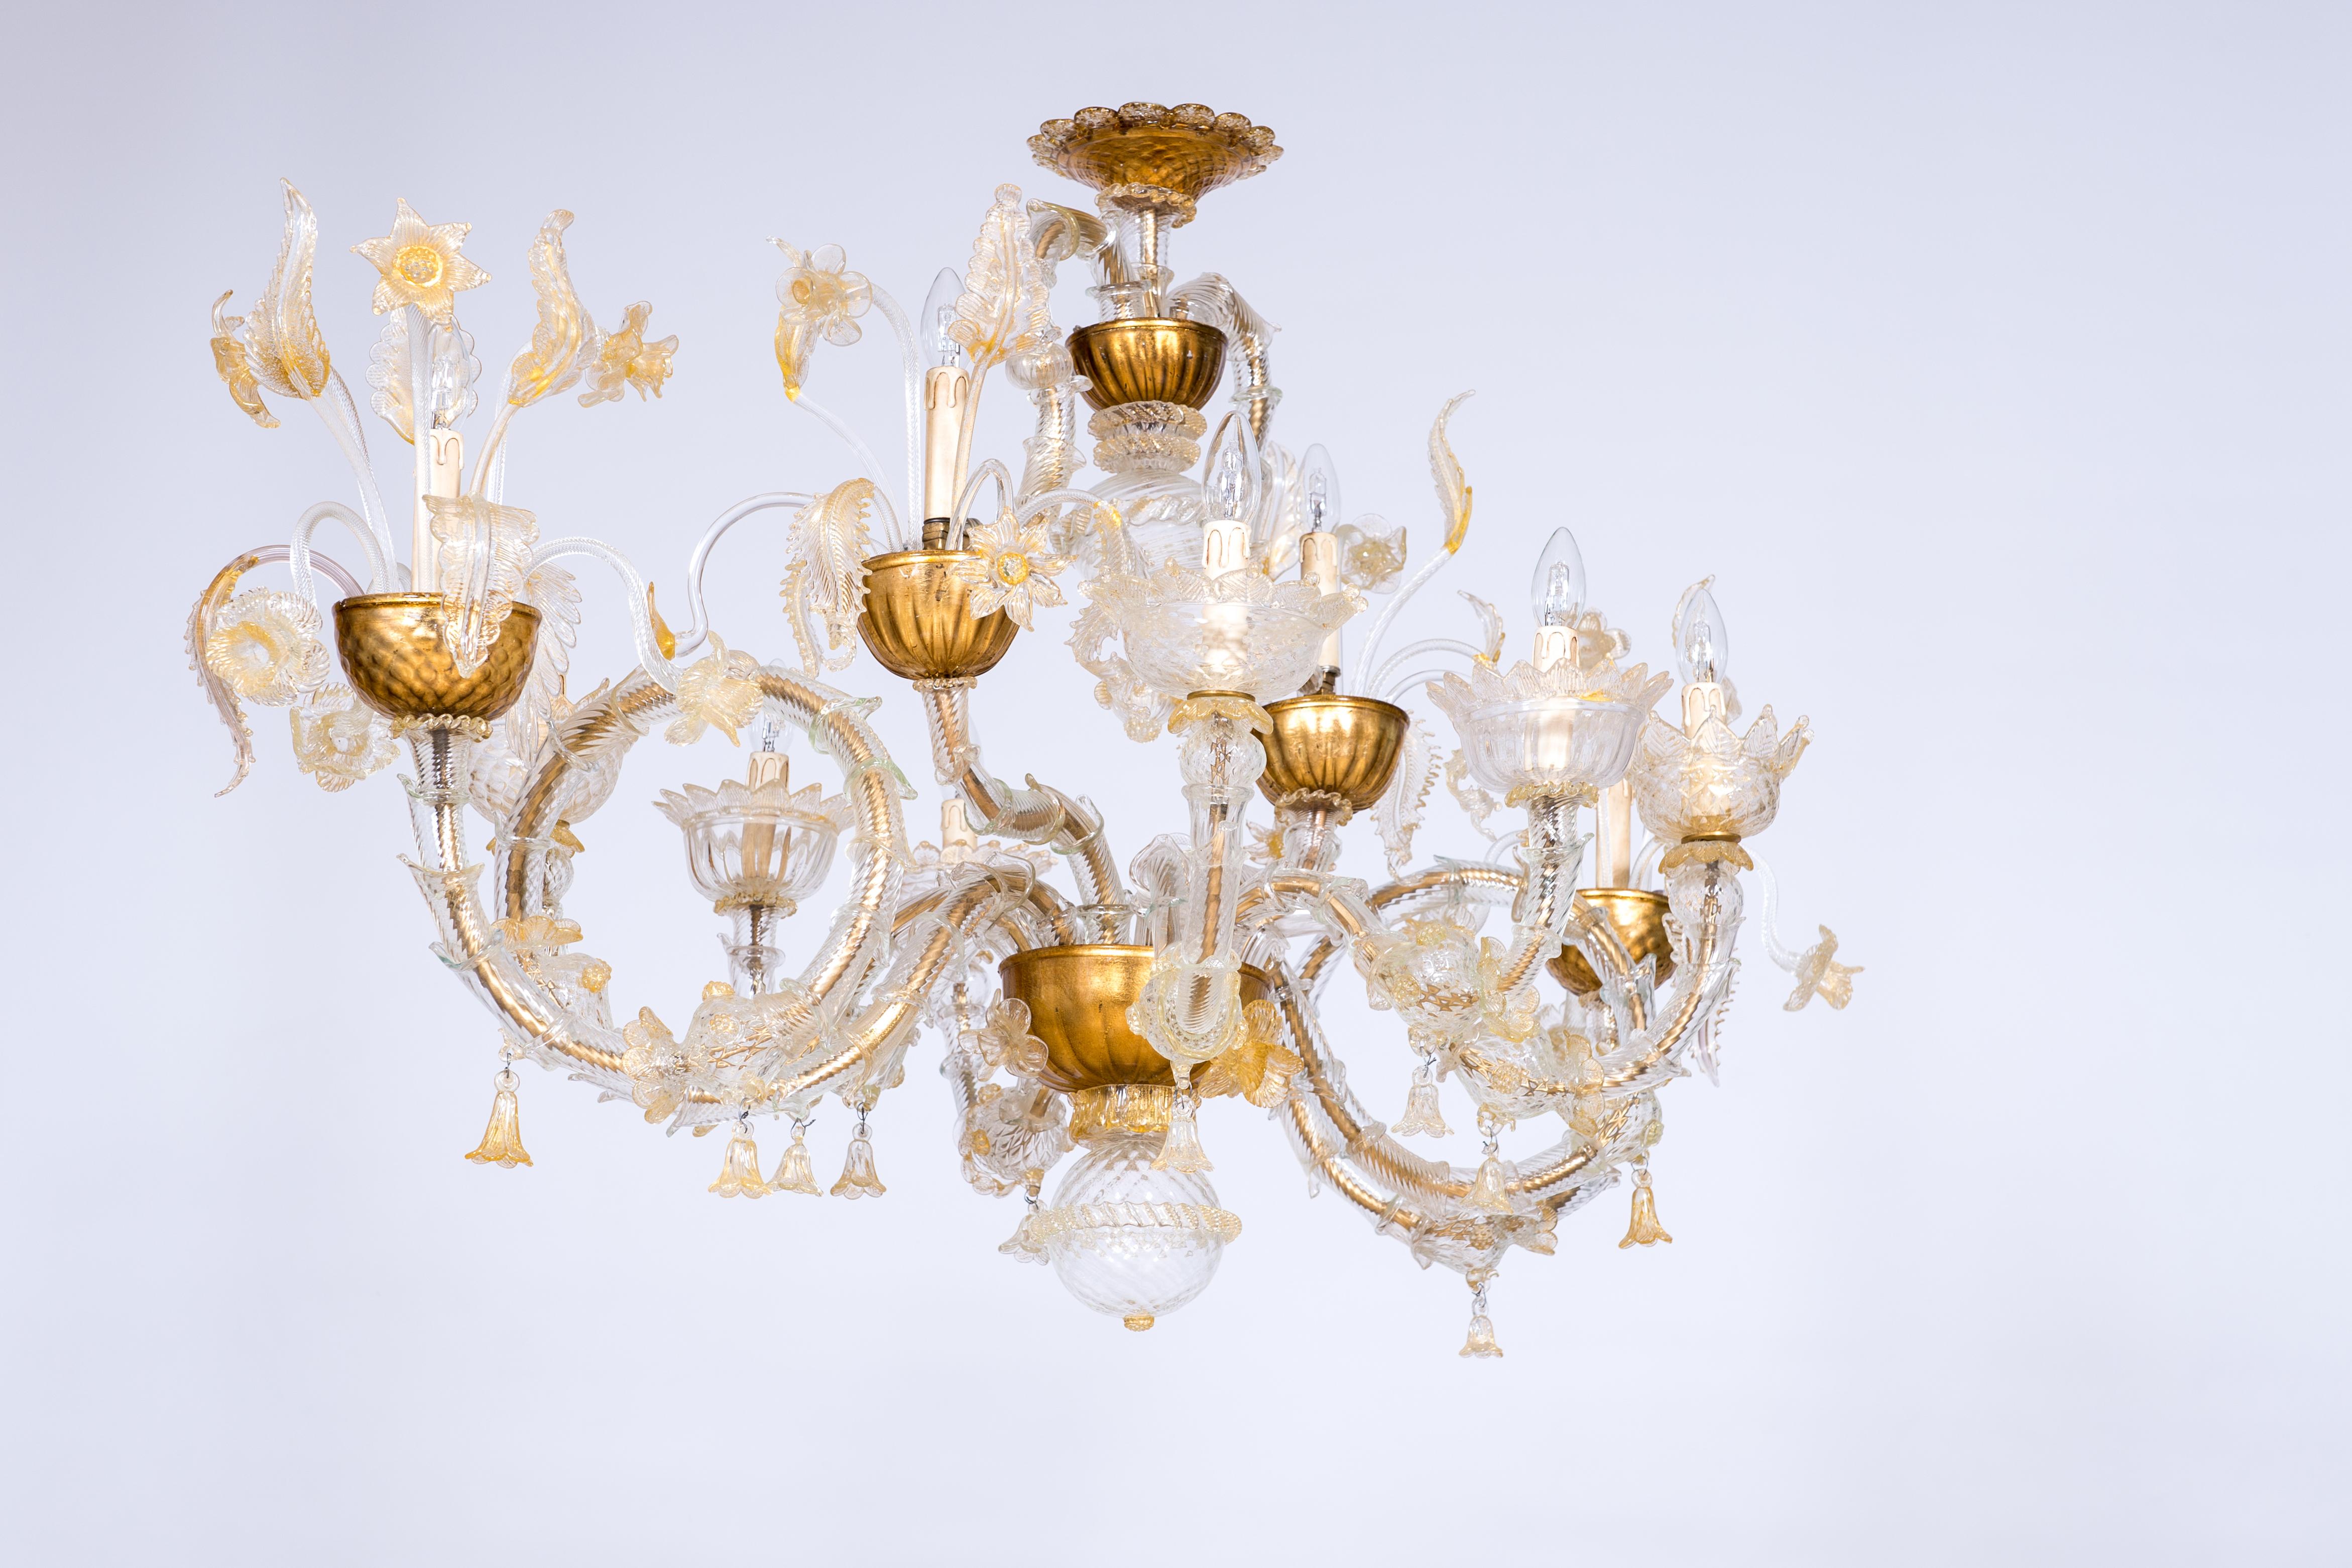 Elegant Italian Venetian Ca' Rezzonico Gondola Chandelier, in blown Murano glass and 24-K Gold. 
This masterpiece was entirely handcrafted and manufactured in the Island of Murano, Venice, where the art of the blown Murano glass is an historical